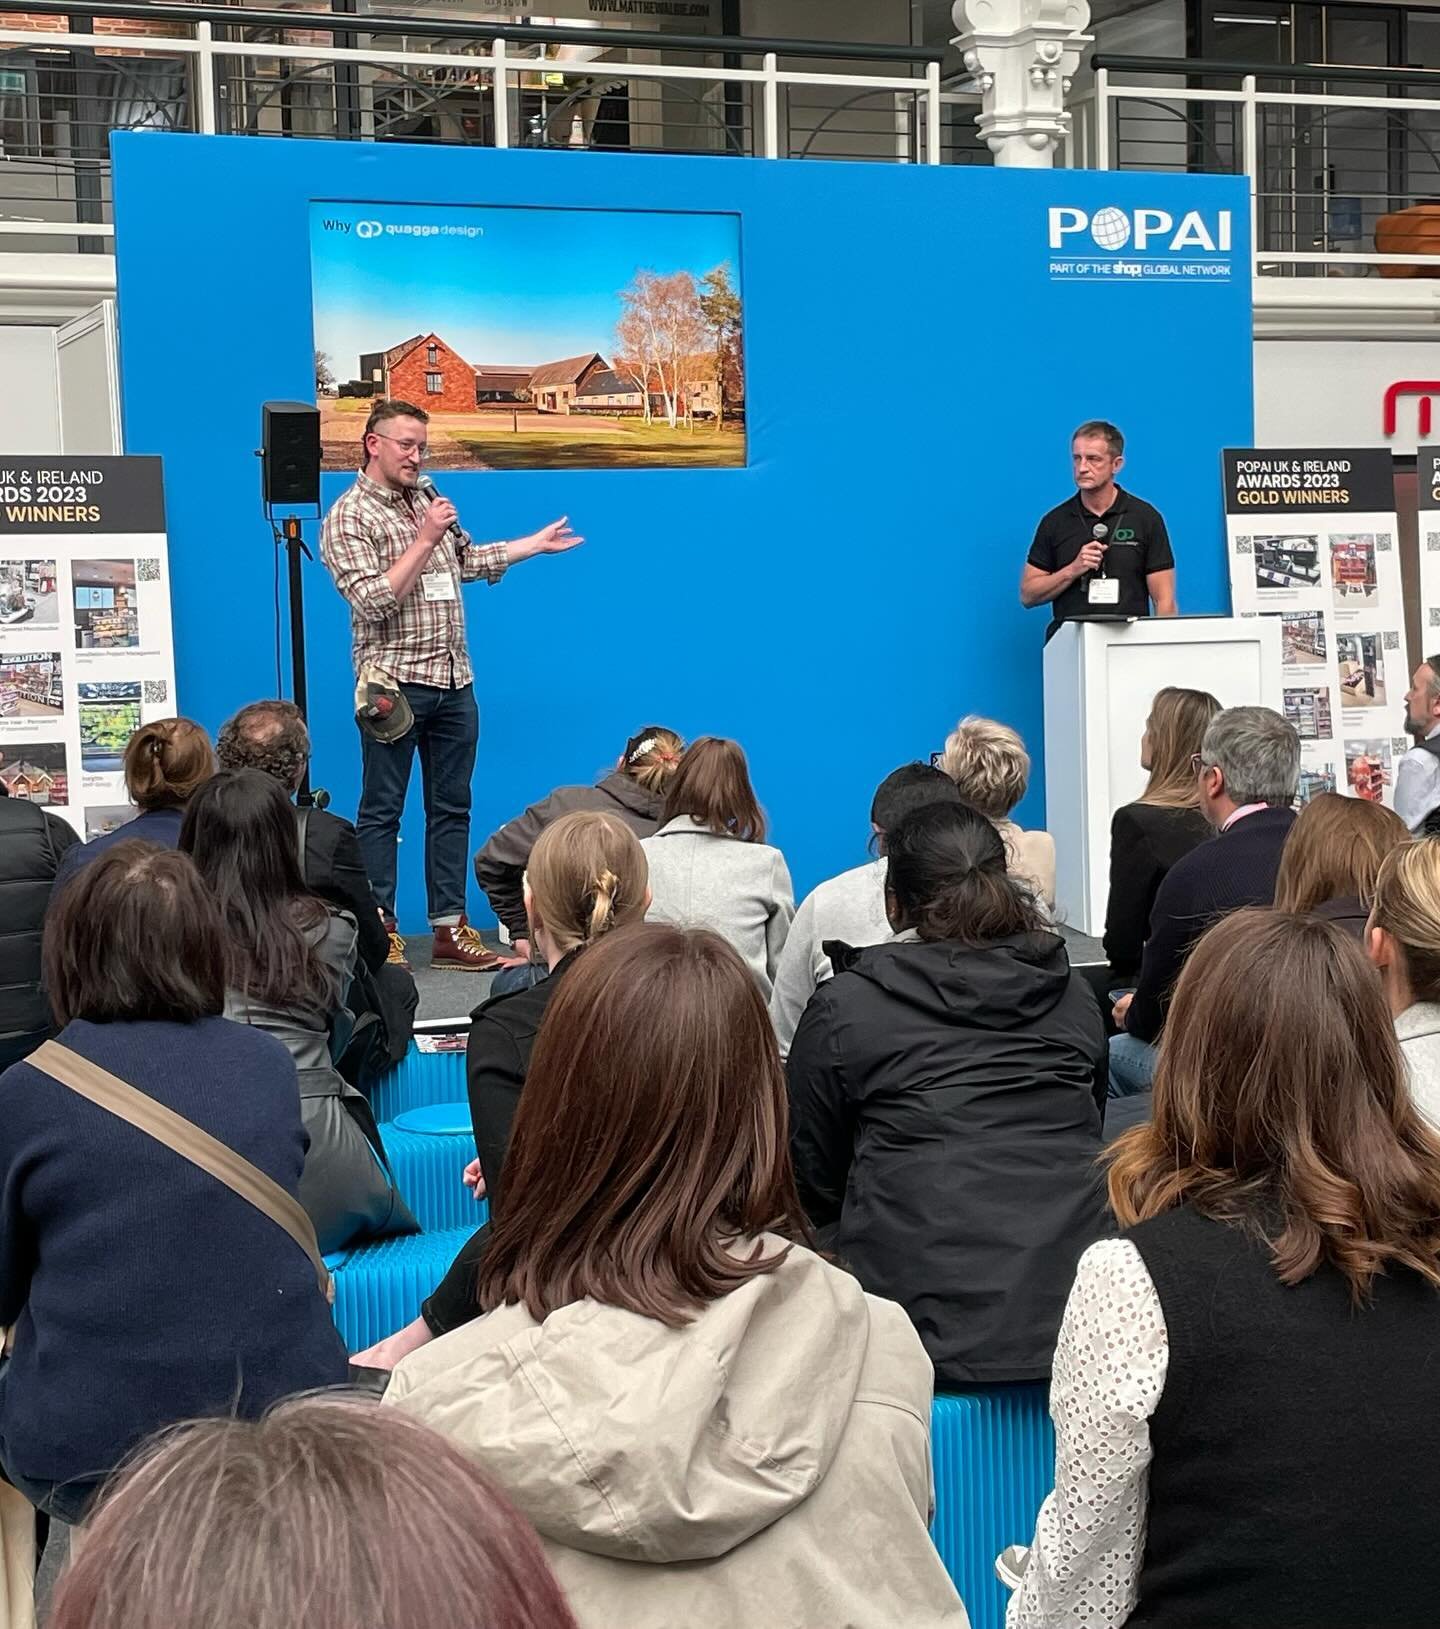 We loved sharing the stage with Oliver Vilcans-Moody to chat through our collaboration with Primark Cares to create an award winning sustainable in-store pop up experience. Thank you POPAI UK &amp; Ireland for inviting us. 

#retaildesign #design #co